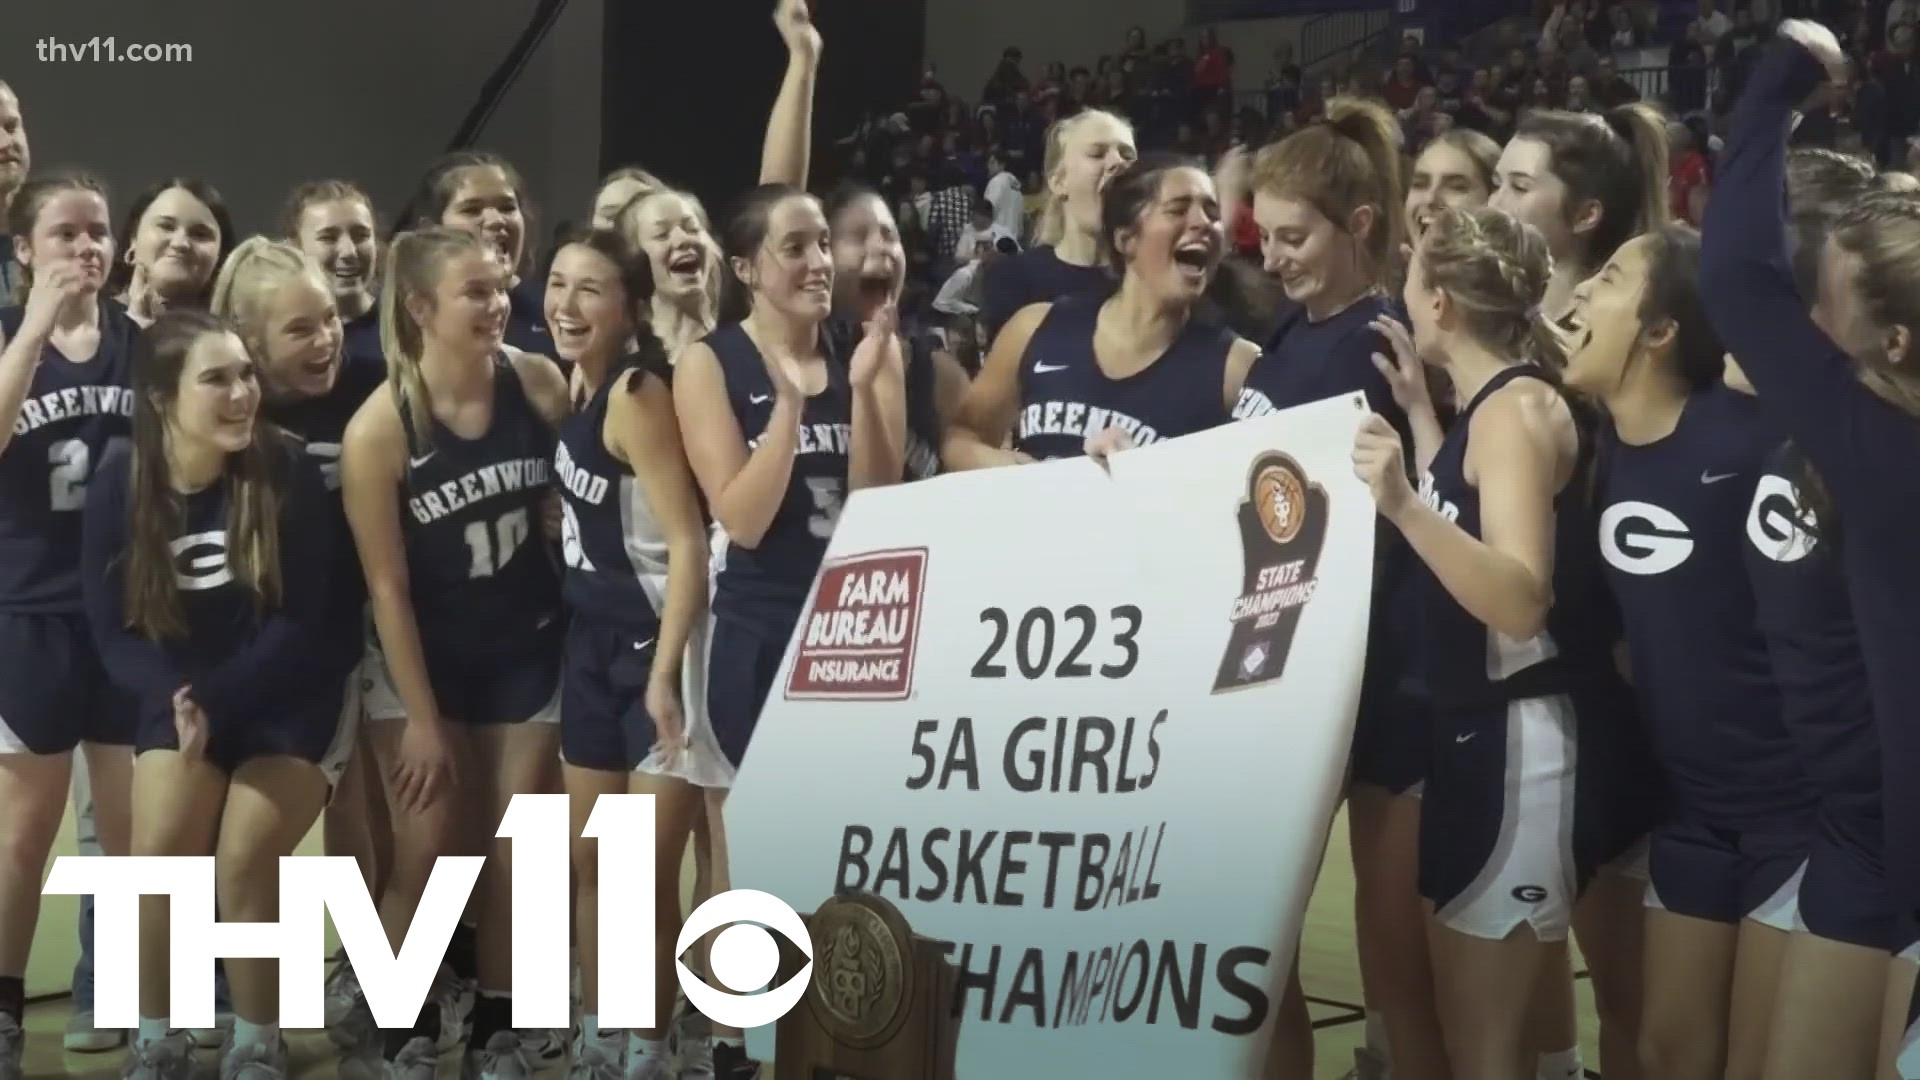 Greenwood started hot and carried that momentum to a 58-35 victory over Vilonia to claim the 5A girls state basketball championship.